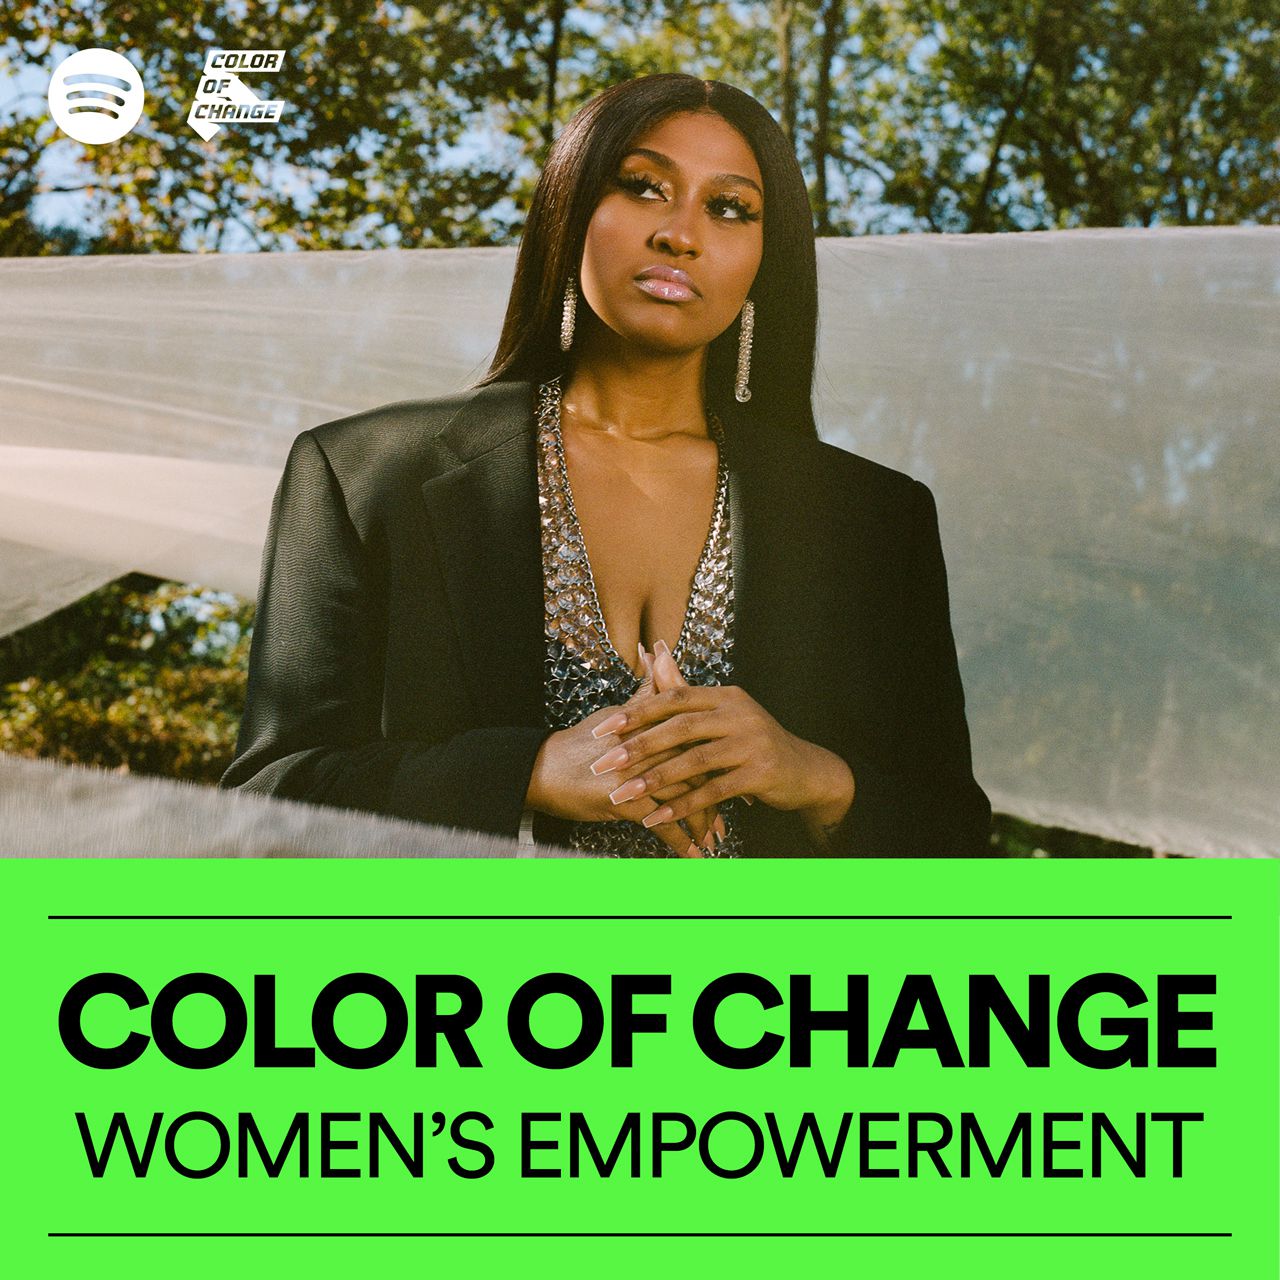 Spotify to highlight women creators with Equal campaign